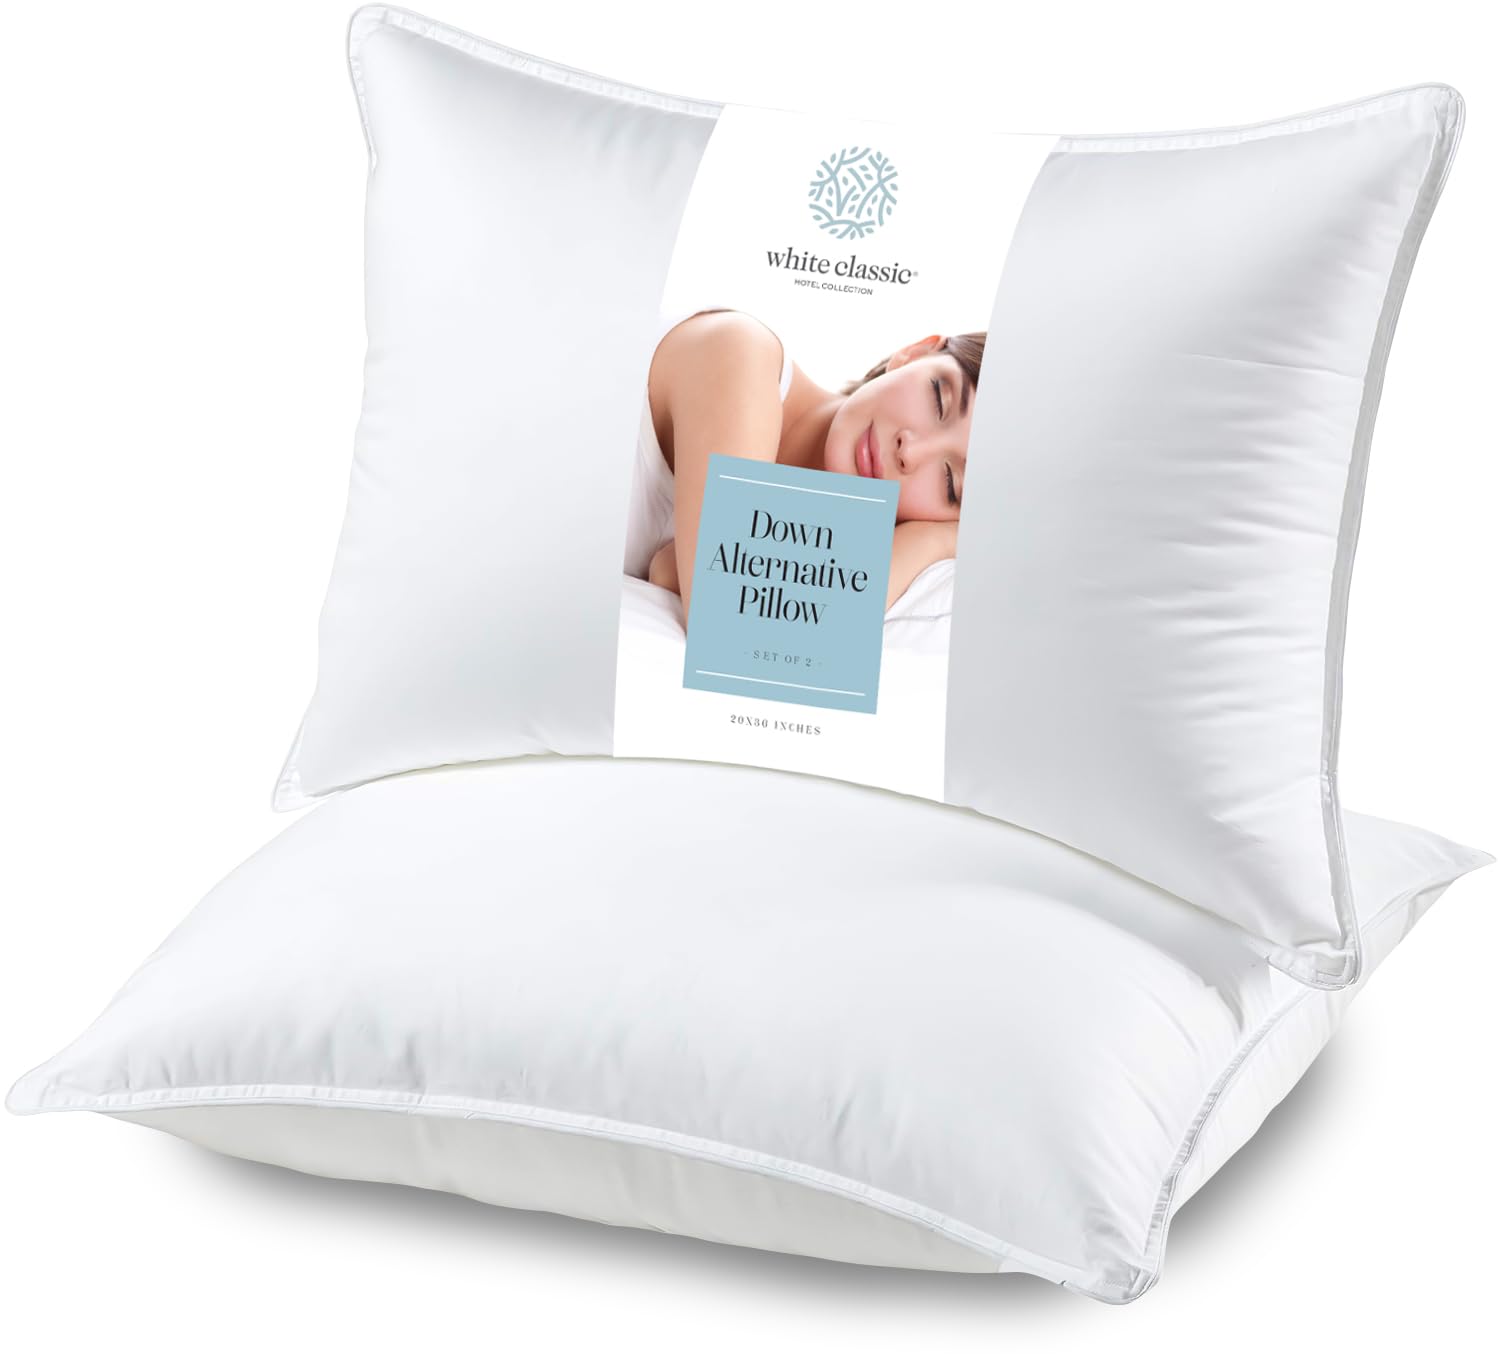 White Classic Bed Pillows for Sleeping 2 Pack, King Size Pillow Side Sleeper Set, Down Alternative Luxury Hotel Soft Pillow 20x36 Inches  - Very Good